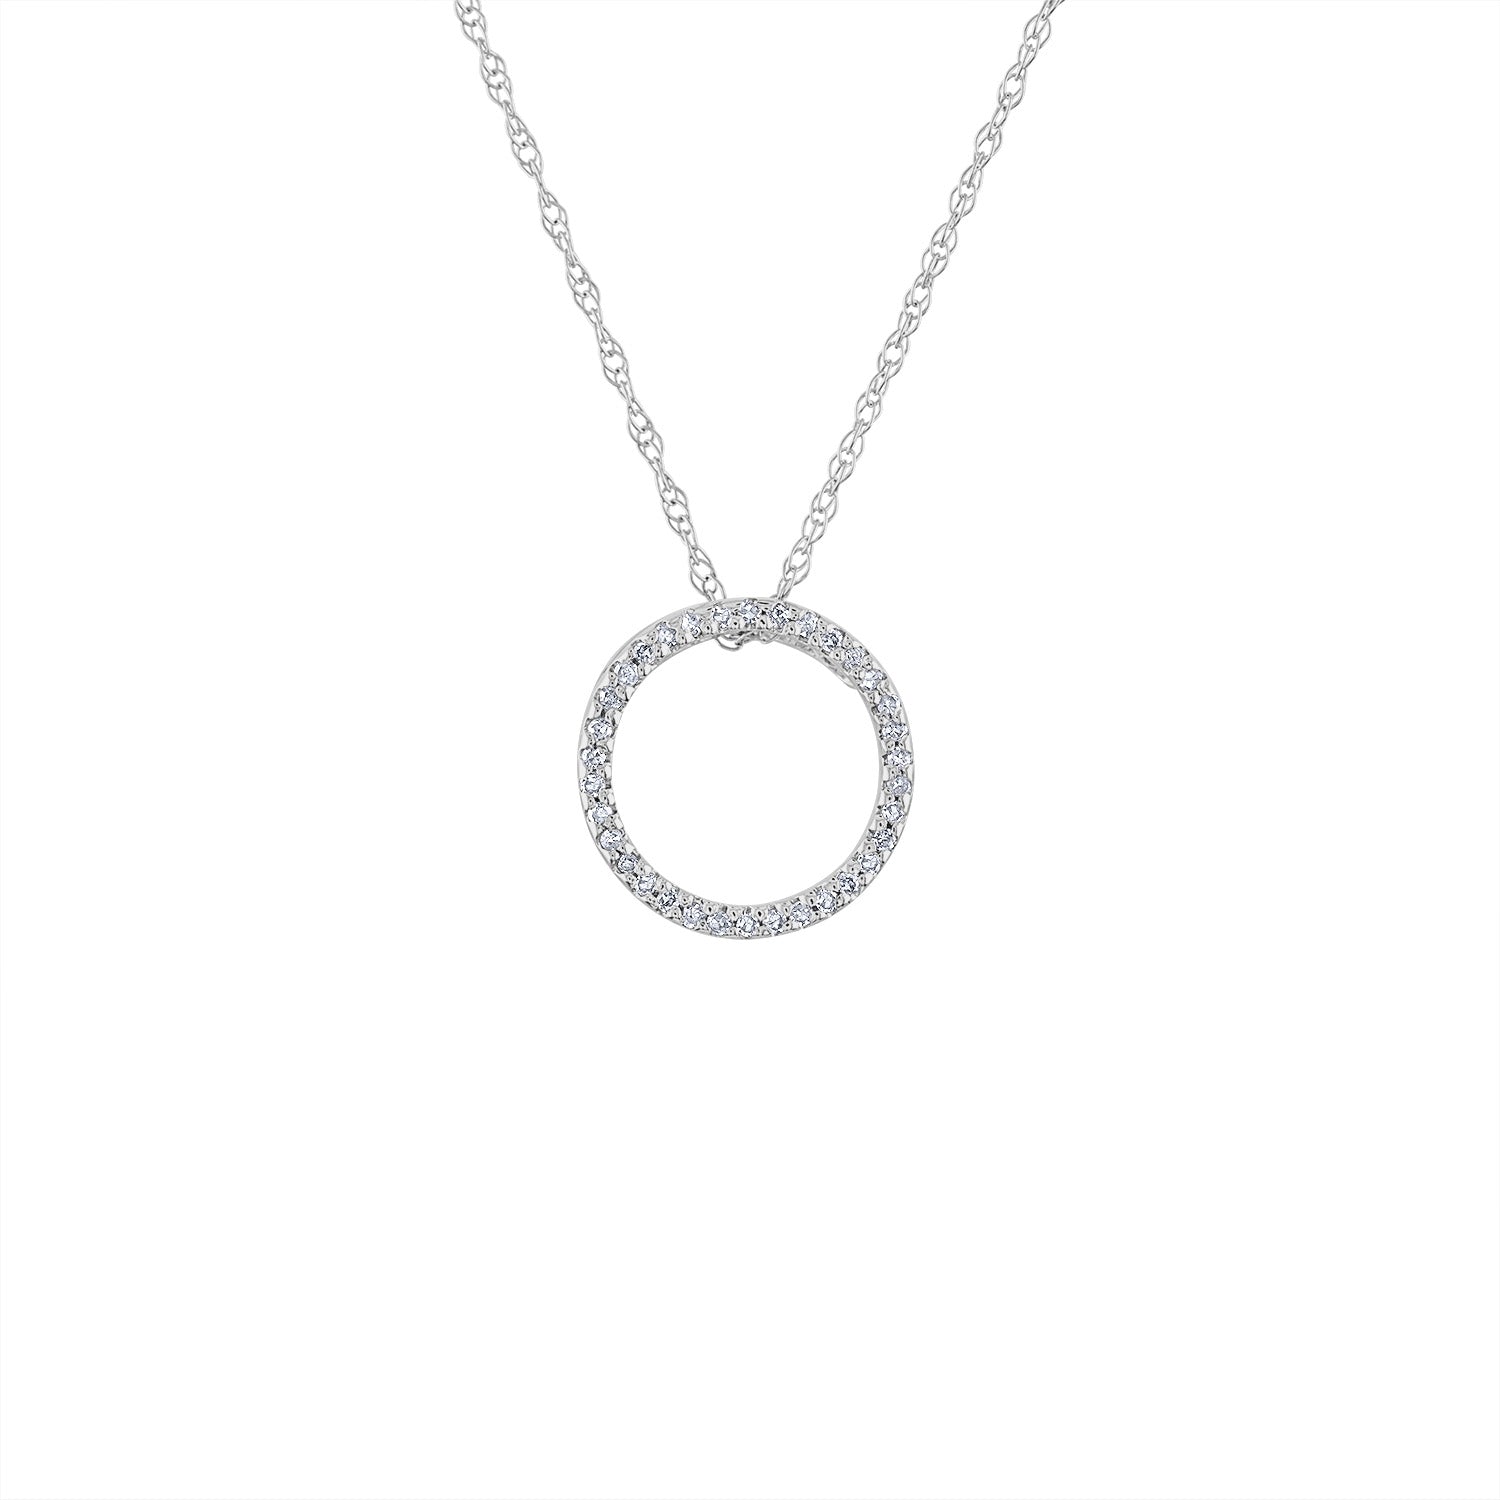 14KT GOLD SMALL DIAMOND OPEN CIRCLE NECKLACE